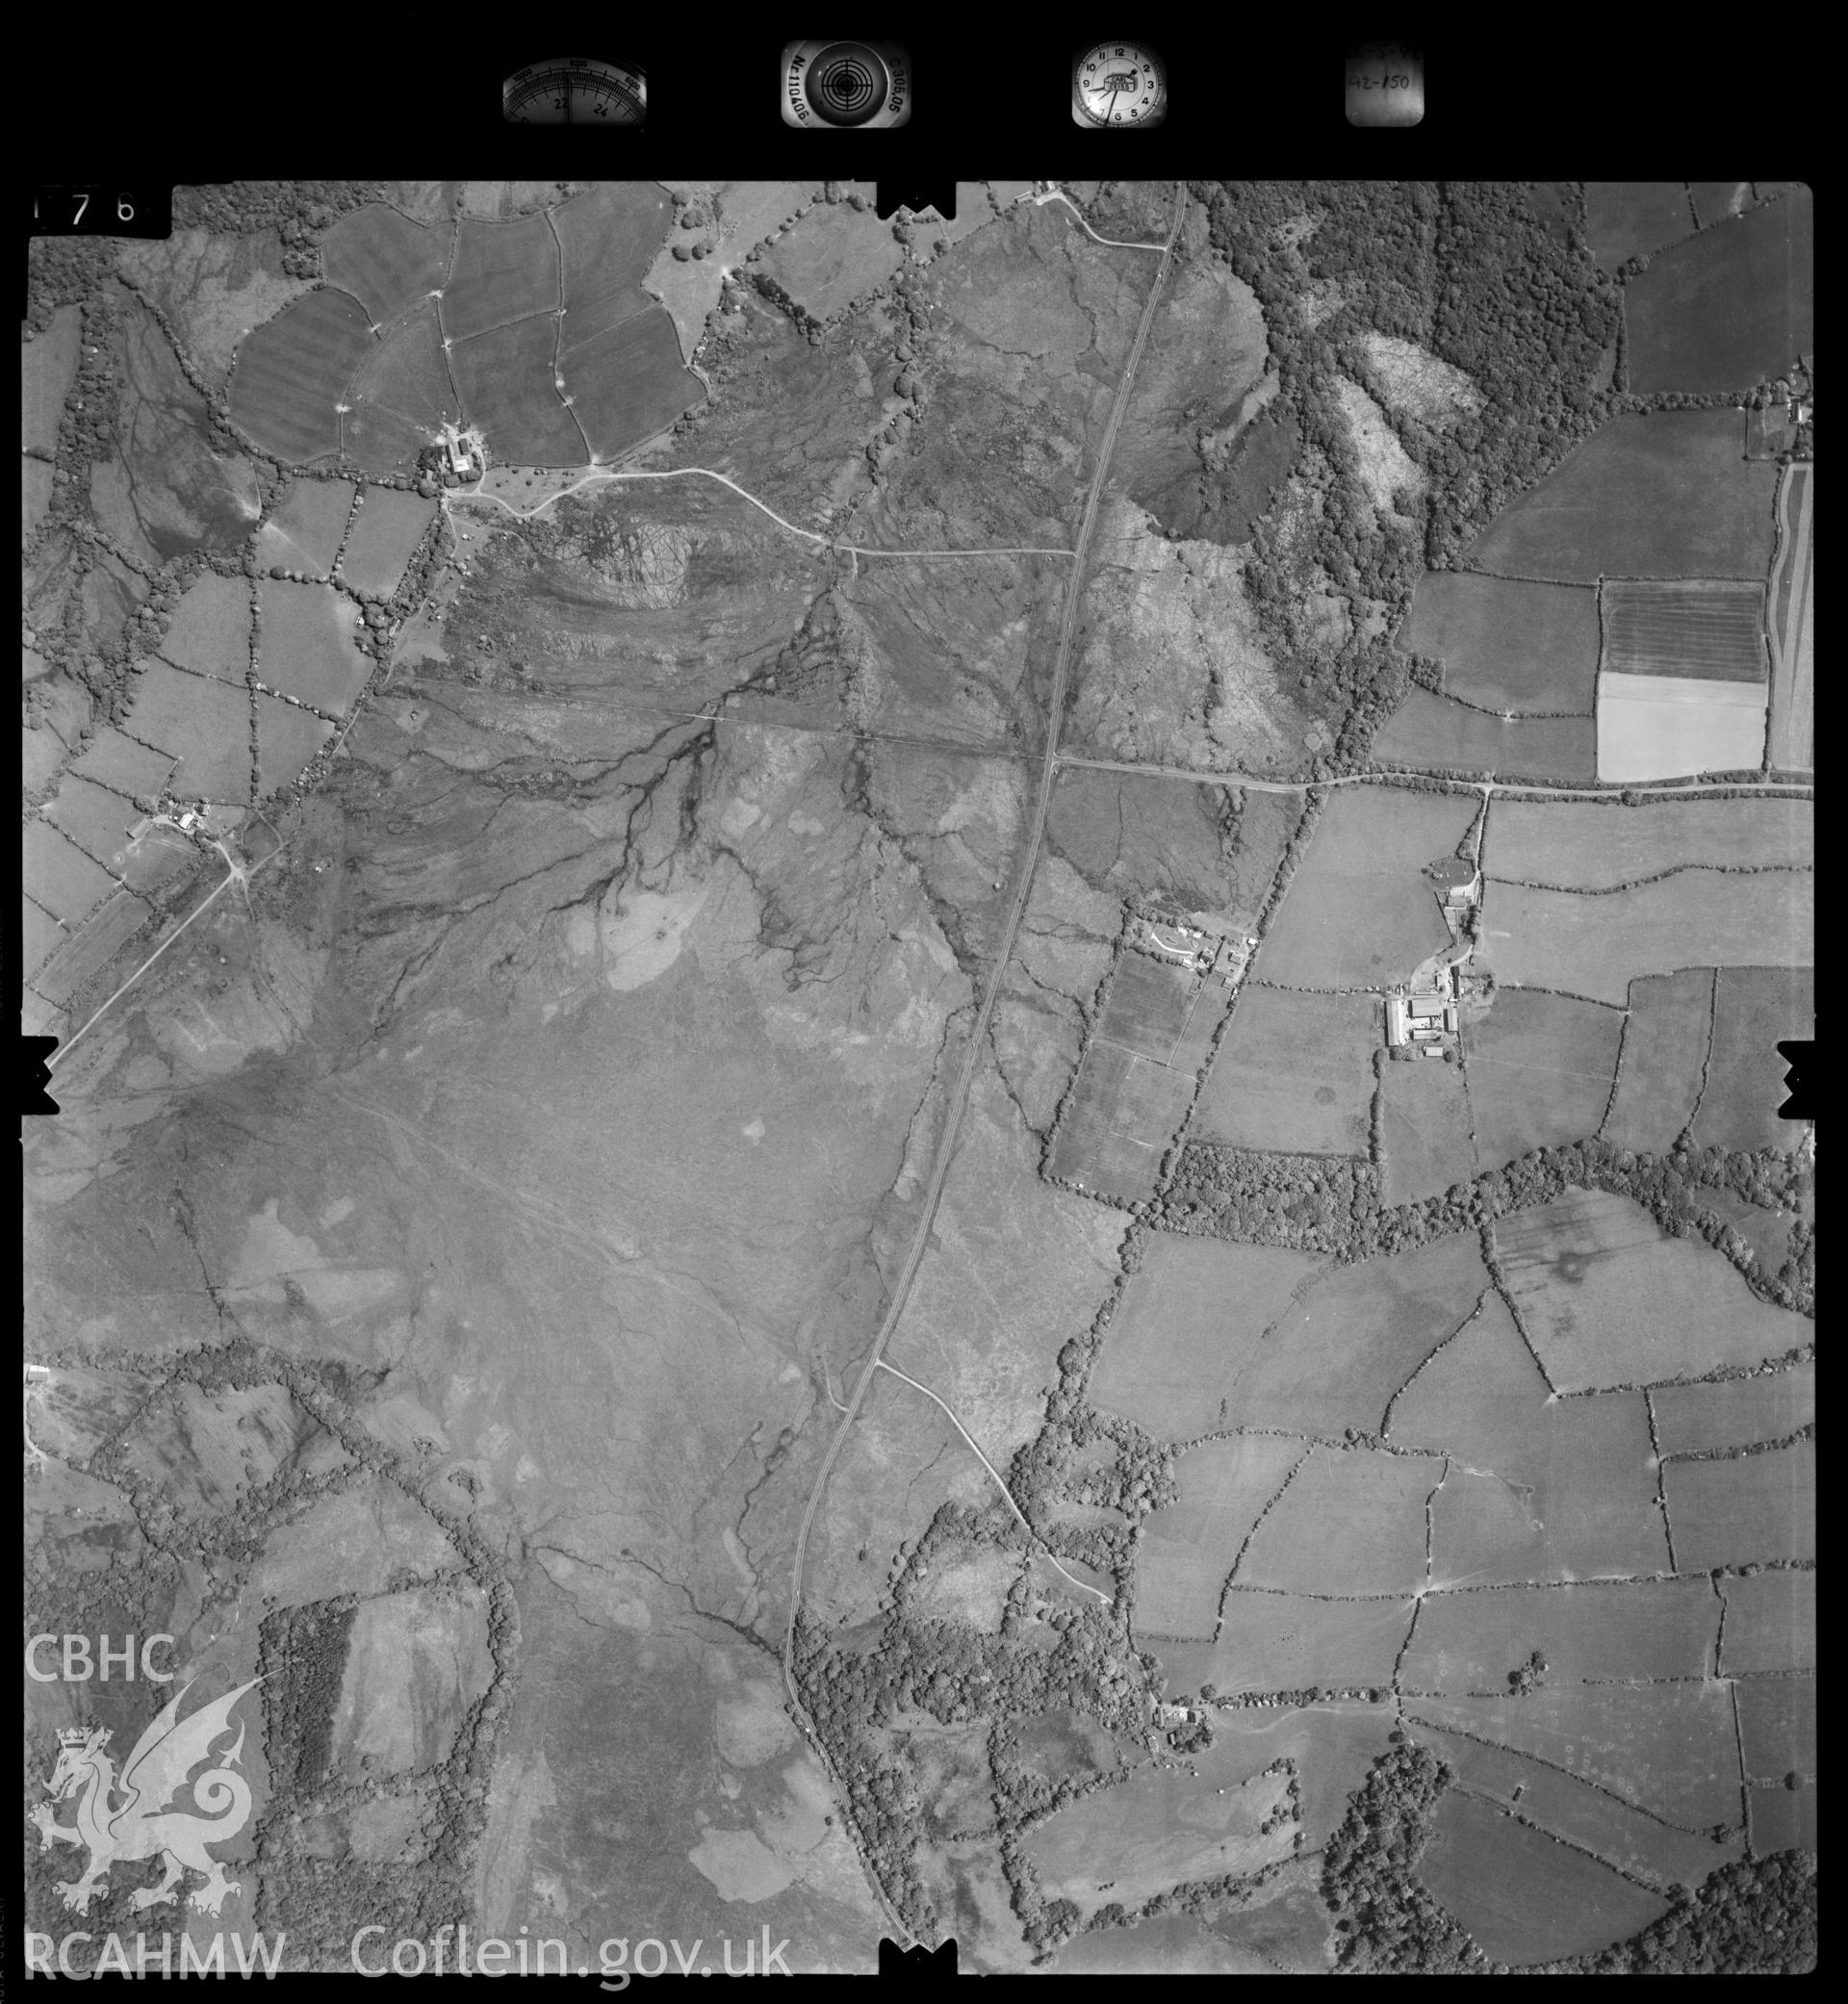 Digitized copy of an aerial photograph showing the area around Pengwern Common, Gower, taken by Ordnance Survey, 1992.